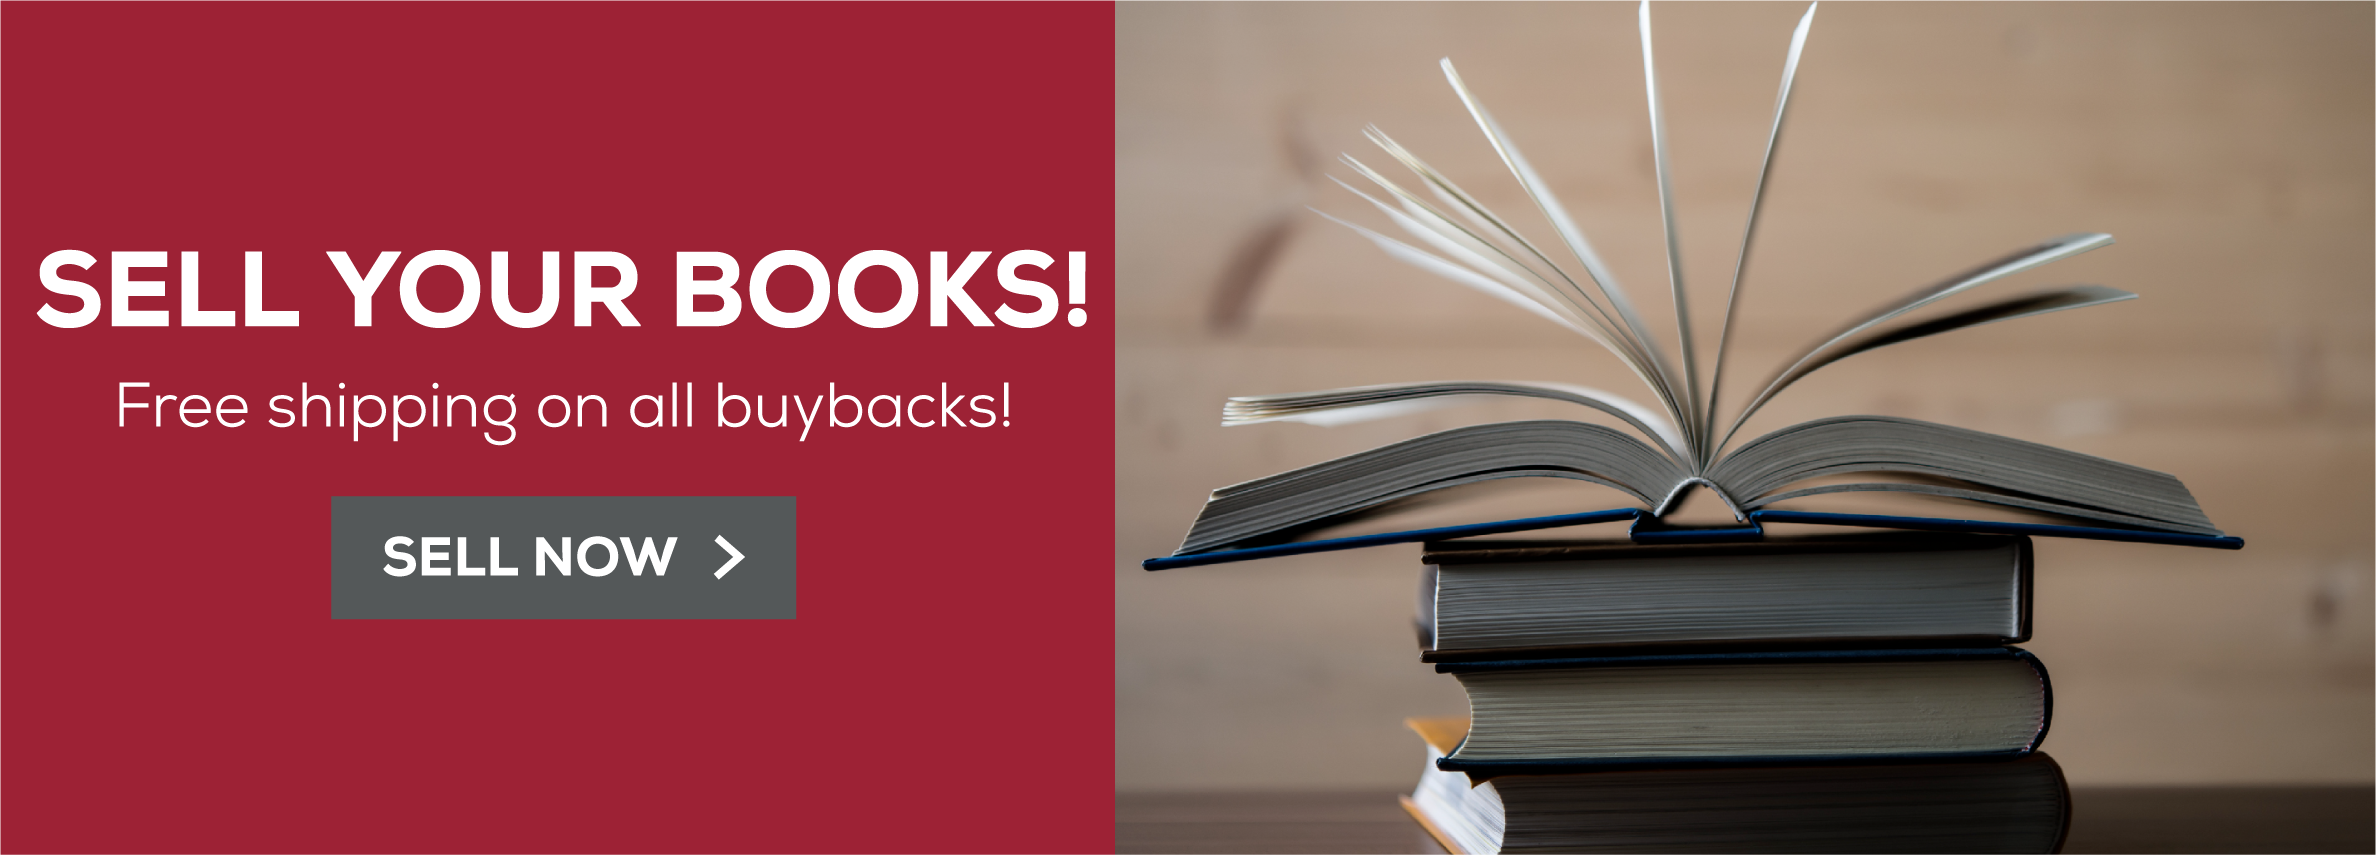 Sell your books! Free shipping on all buybacks! Sell now